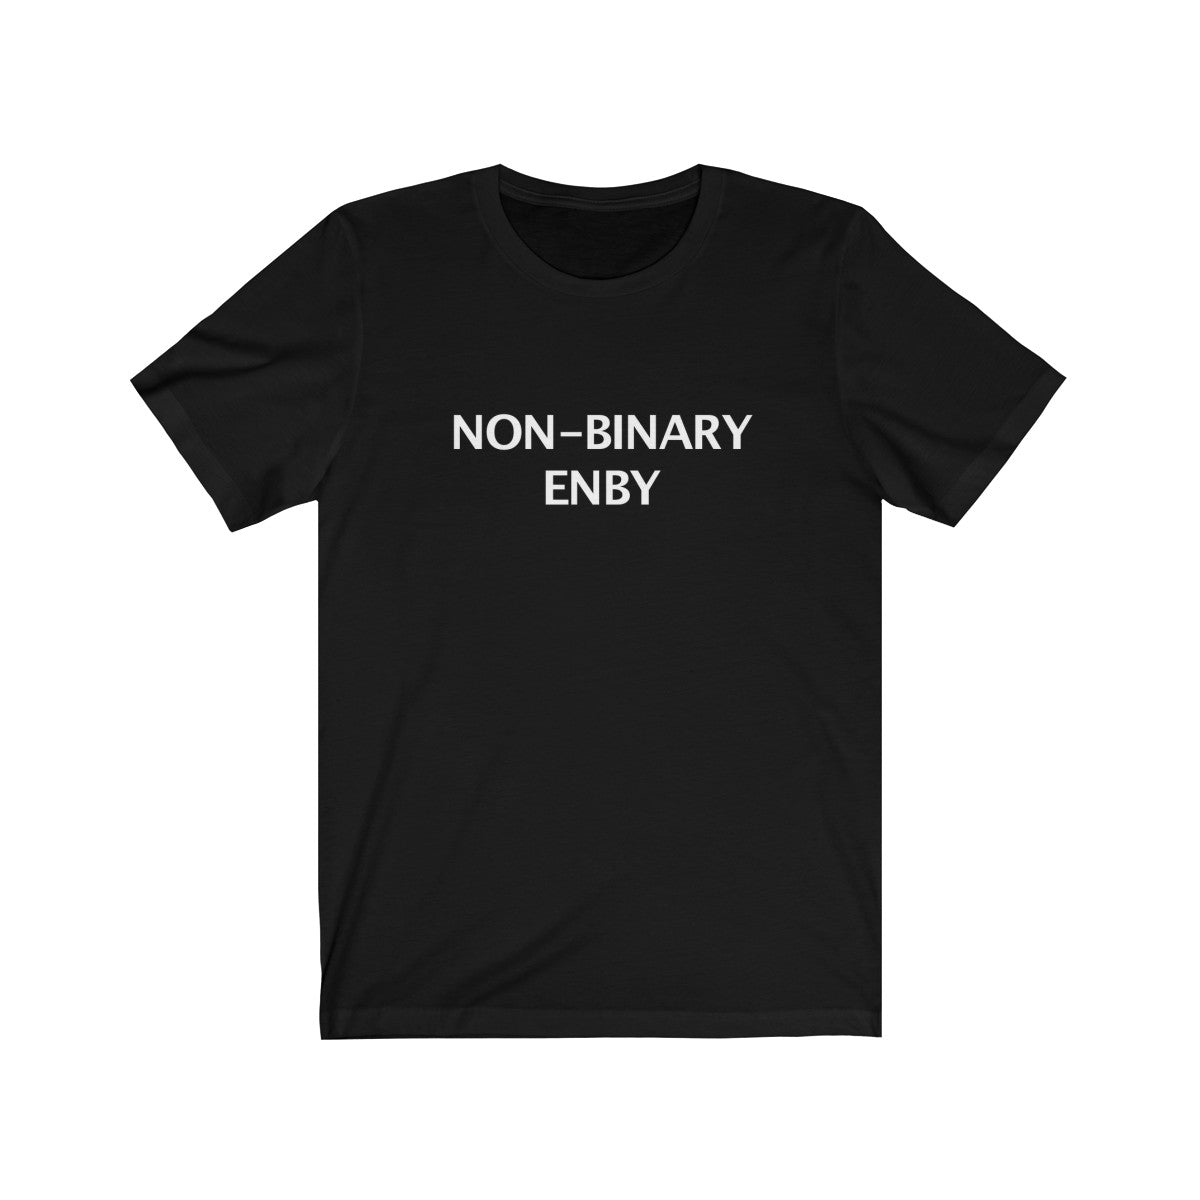 Nonbinary or Enby: What's This All About?